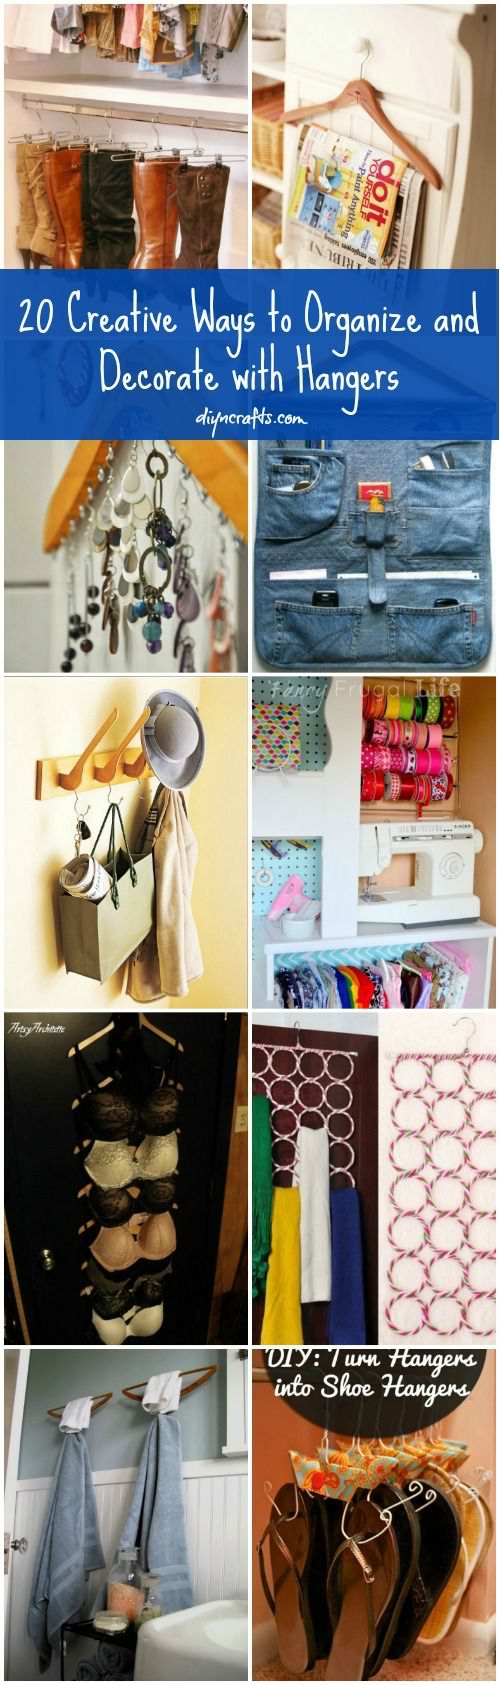 20 Creative Ways to Organize and Decorate with Hangers